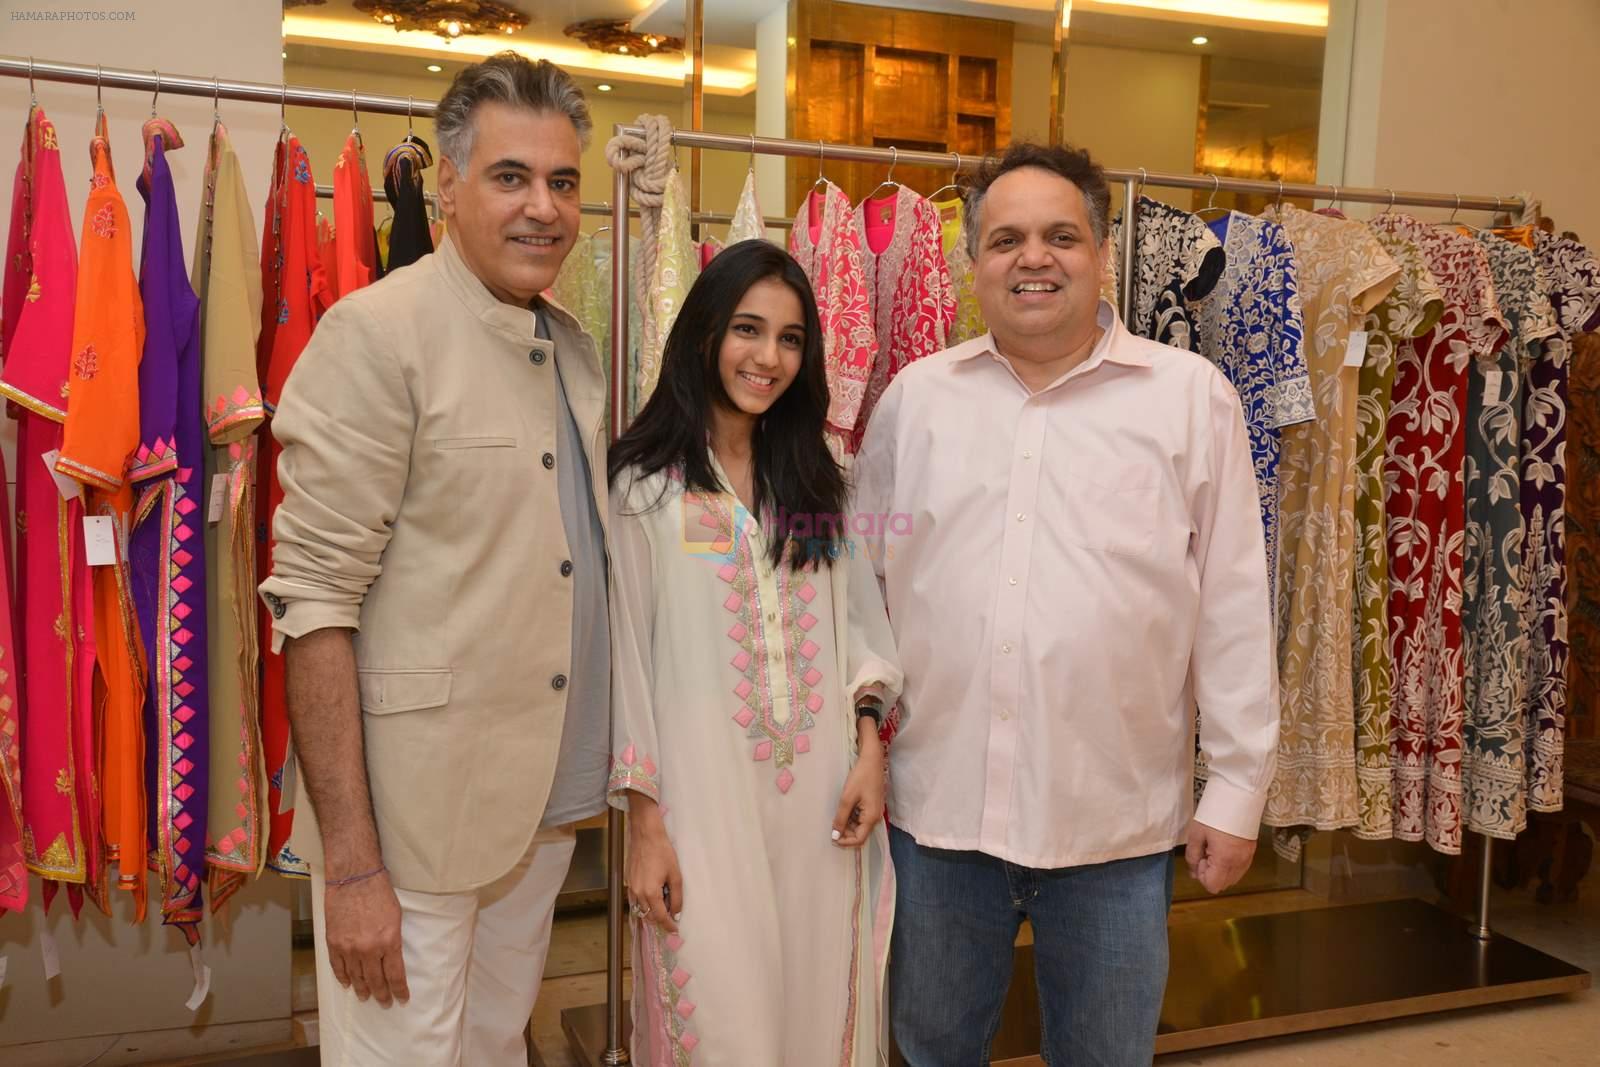 Abu Sandeep Spring Summer collection launch in kemps Corner, Mumbai on 10th April 2015